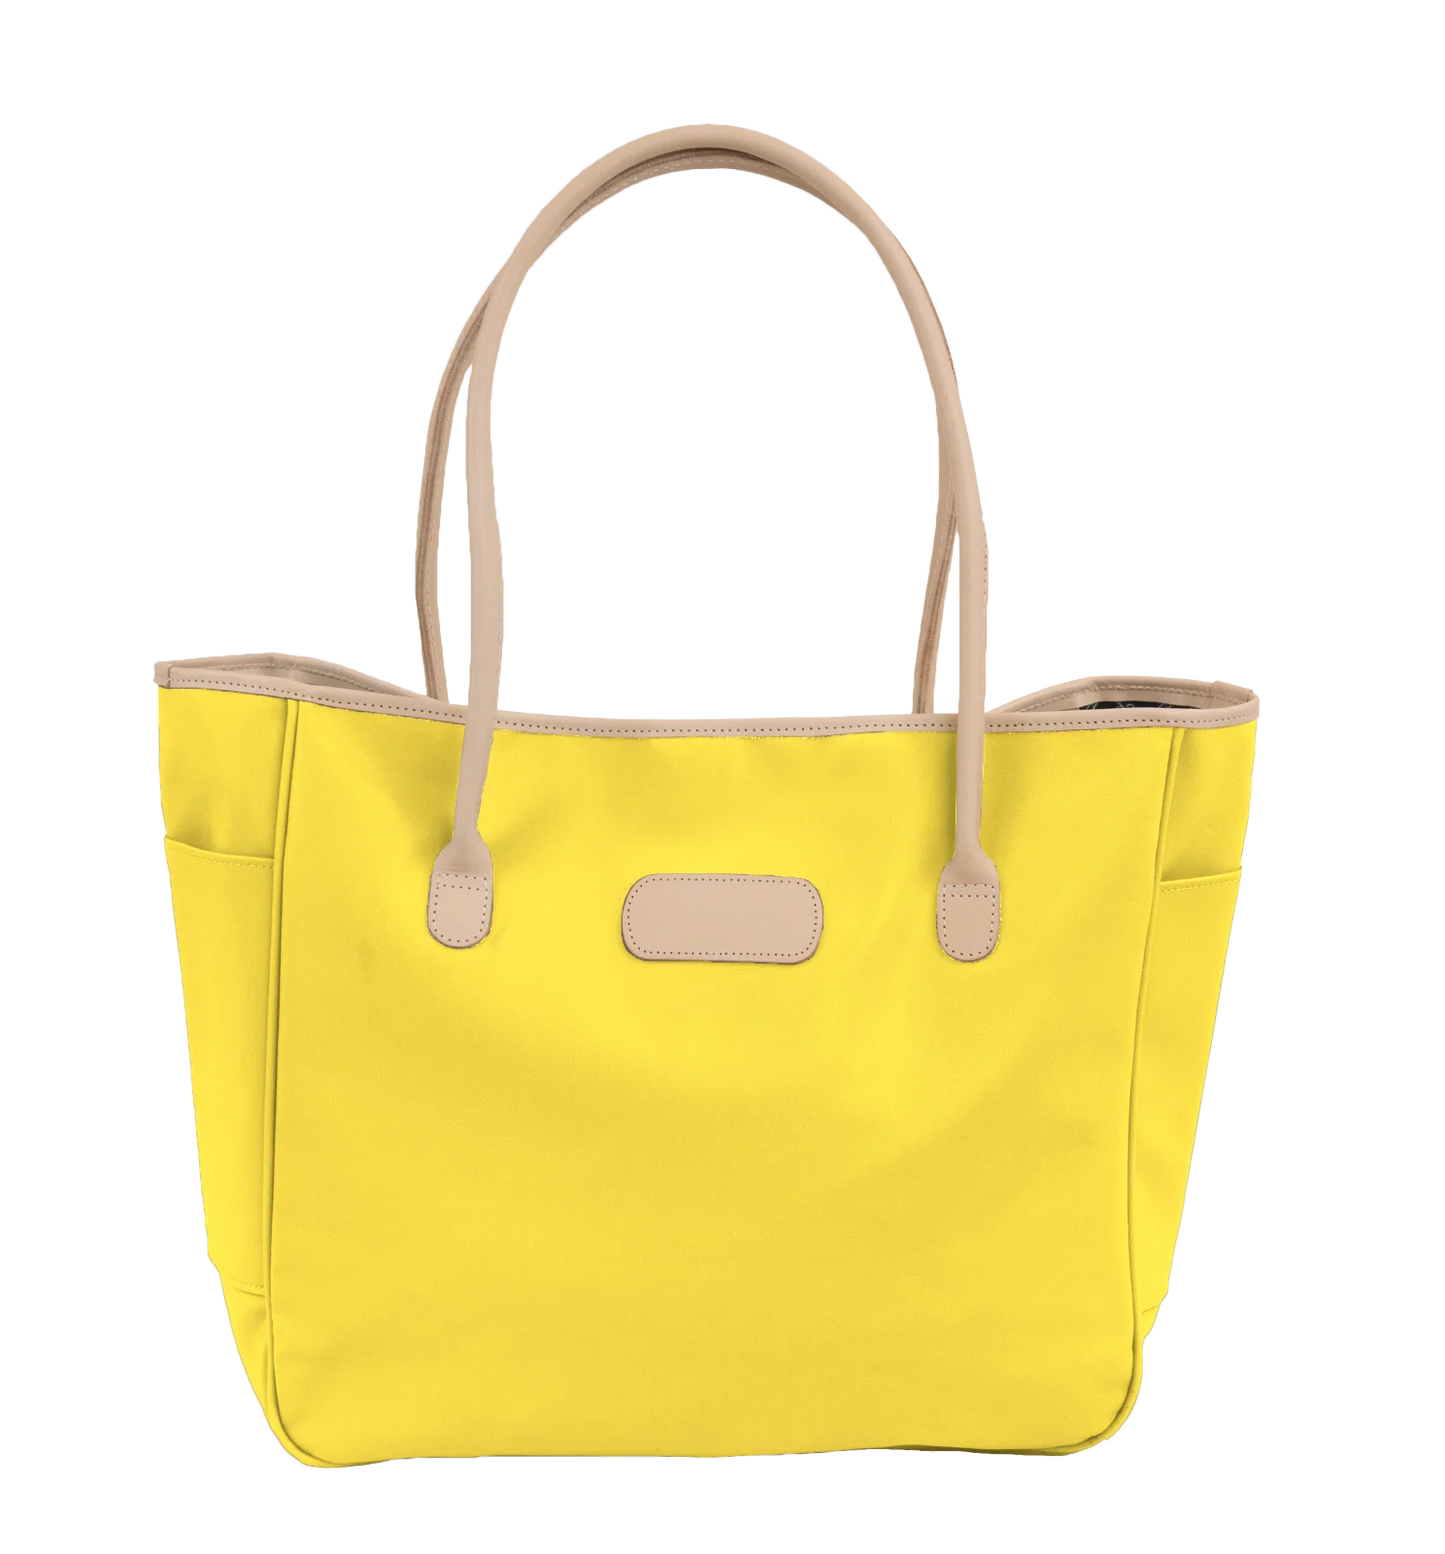 Tyler Tote